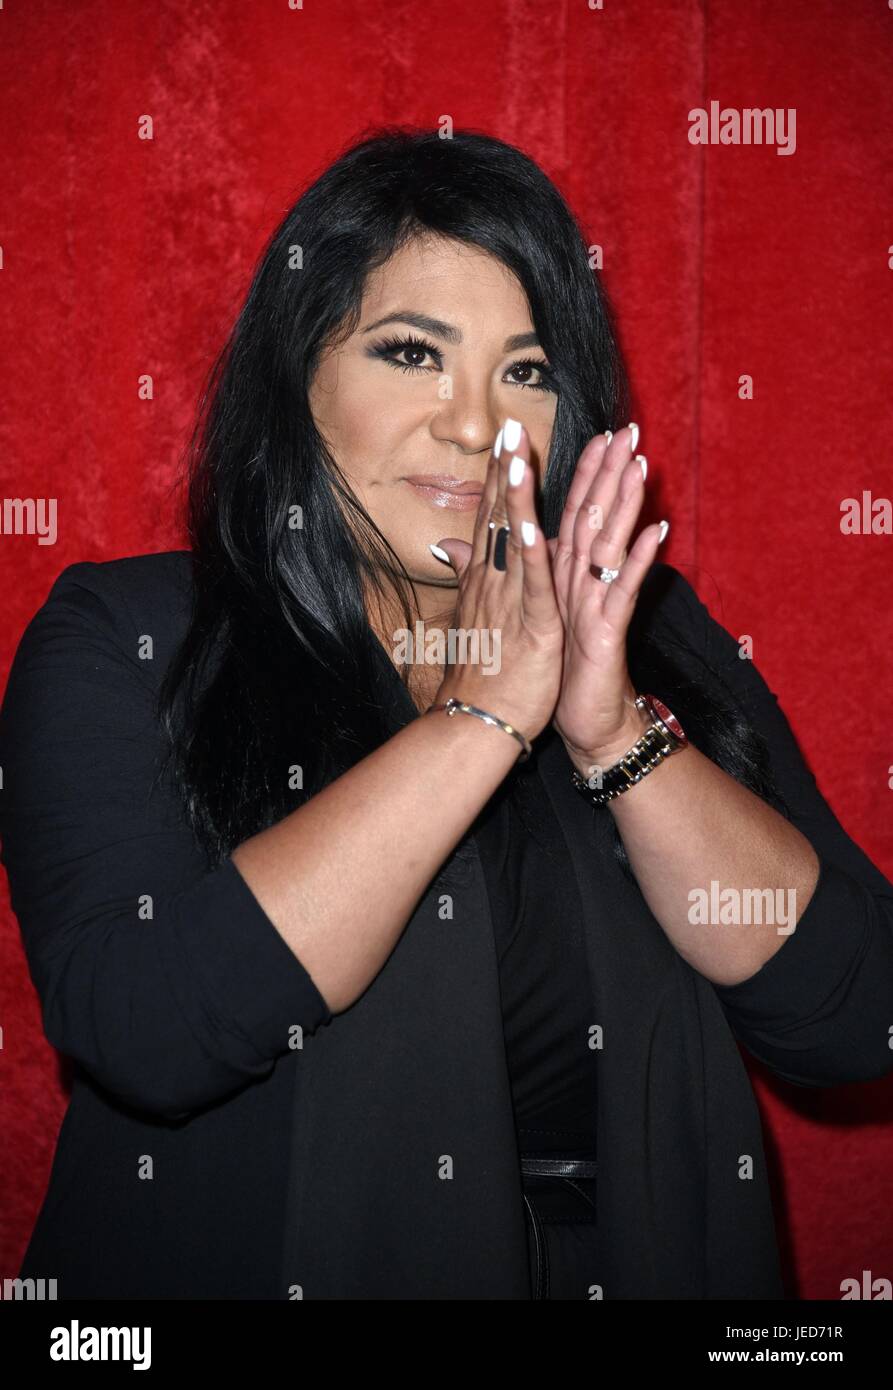 New York, NY, USA. 23rd June, 2017. Suzette Quintanilla in attendance for Madame Tussauds New York Unveils Selena Quintanilla's Wax Figure to Launch, Madame Tussauds, New York, NY June 23, 2017. Credit: Derek Storm/Everett Collection/Alamy Live News Stock Photo